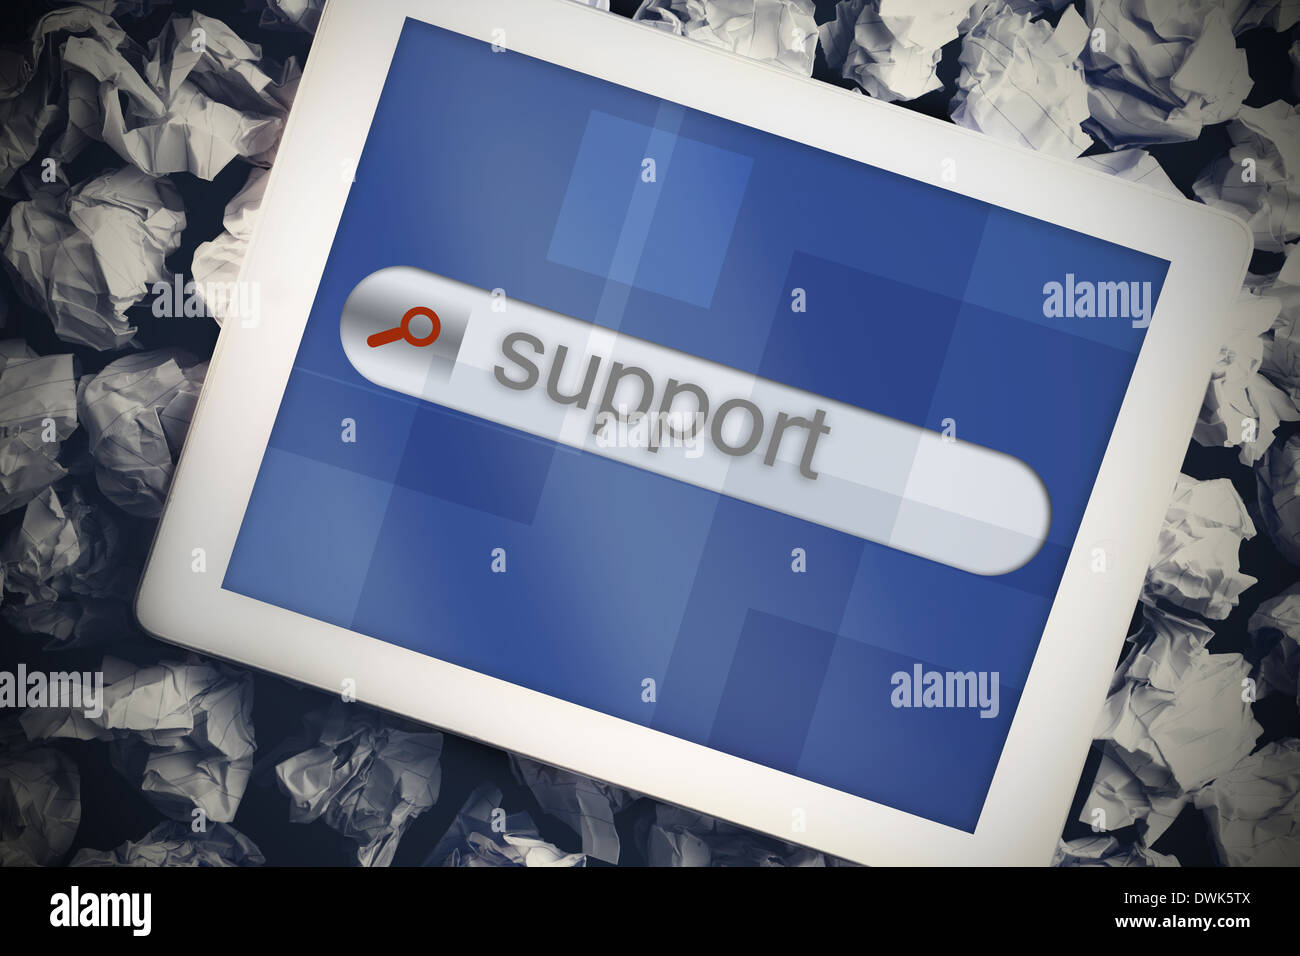 Support in search bar on tablet screen Stock Photo